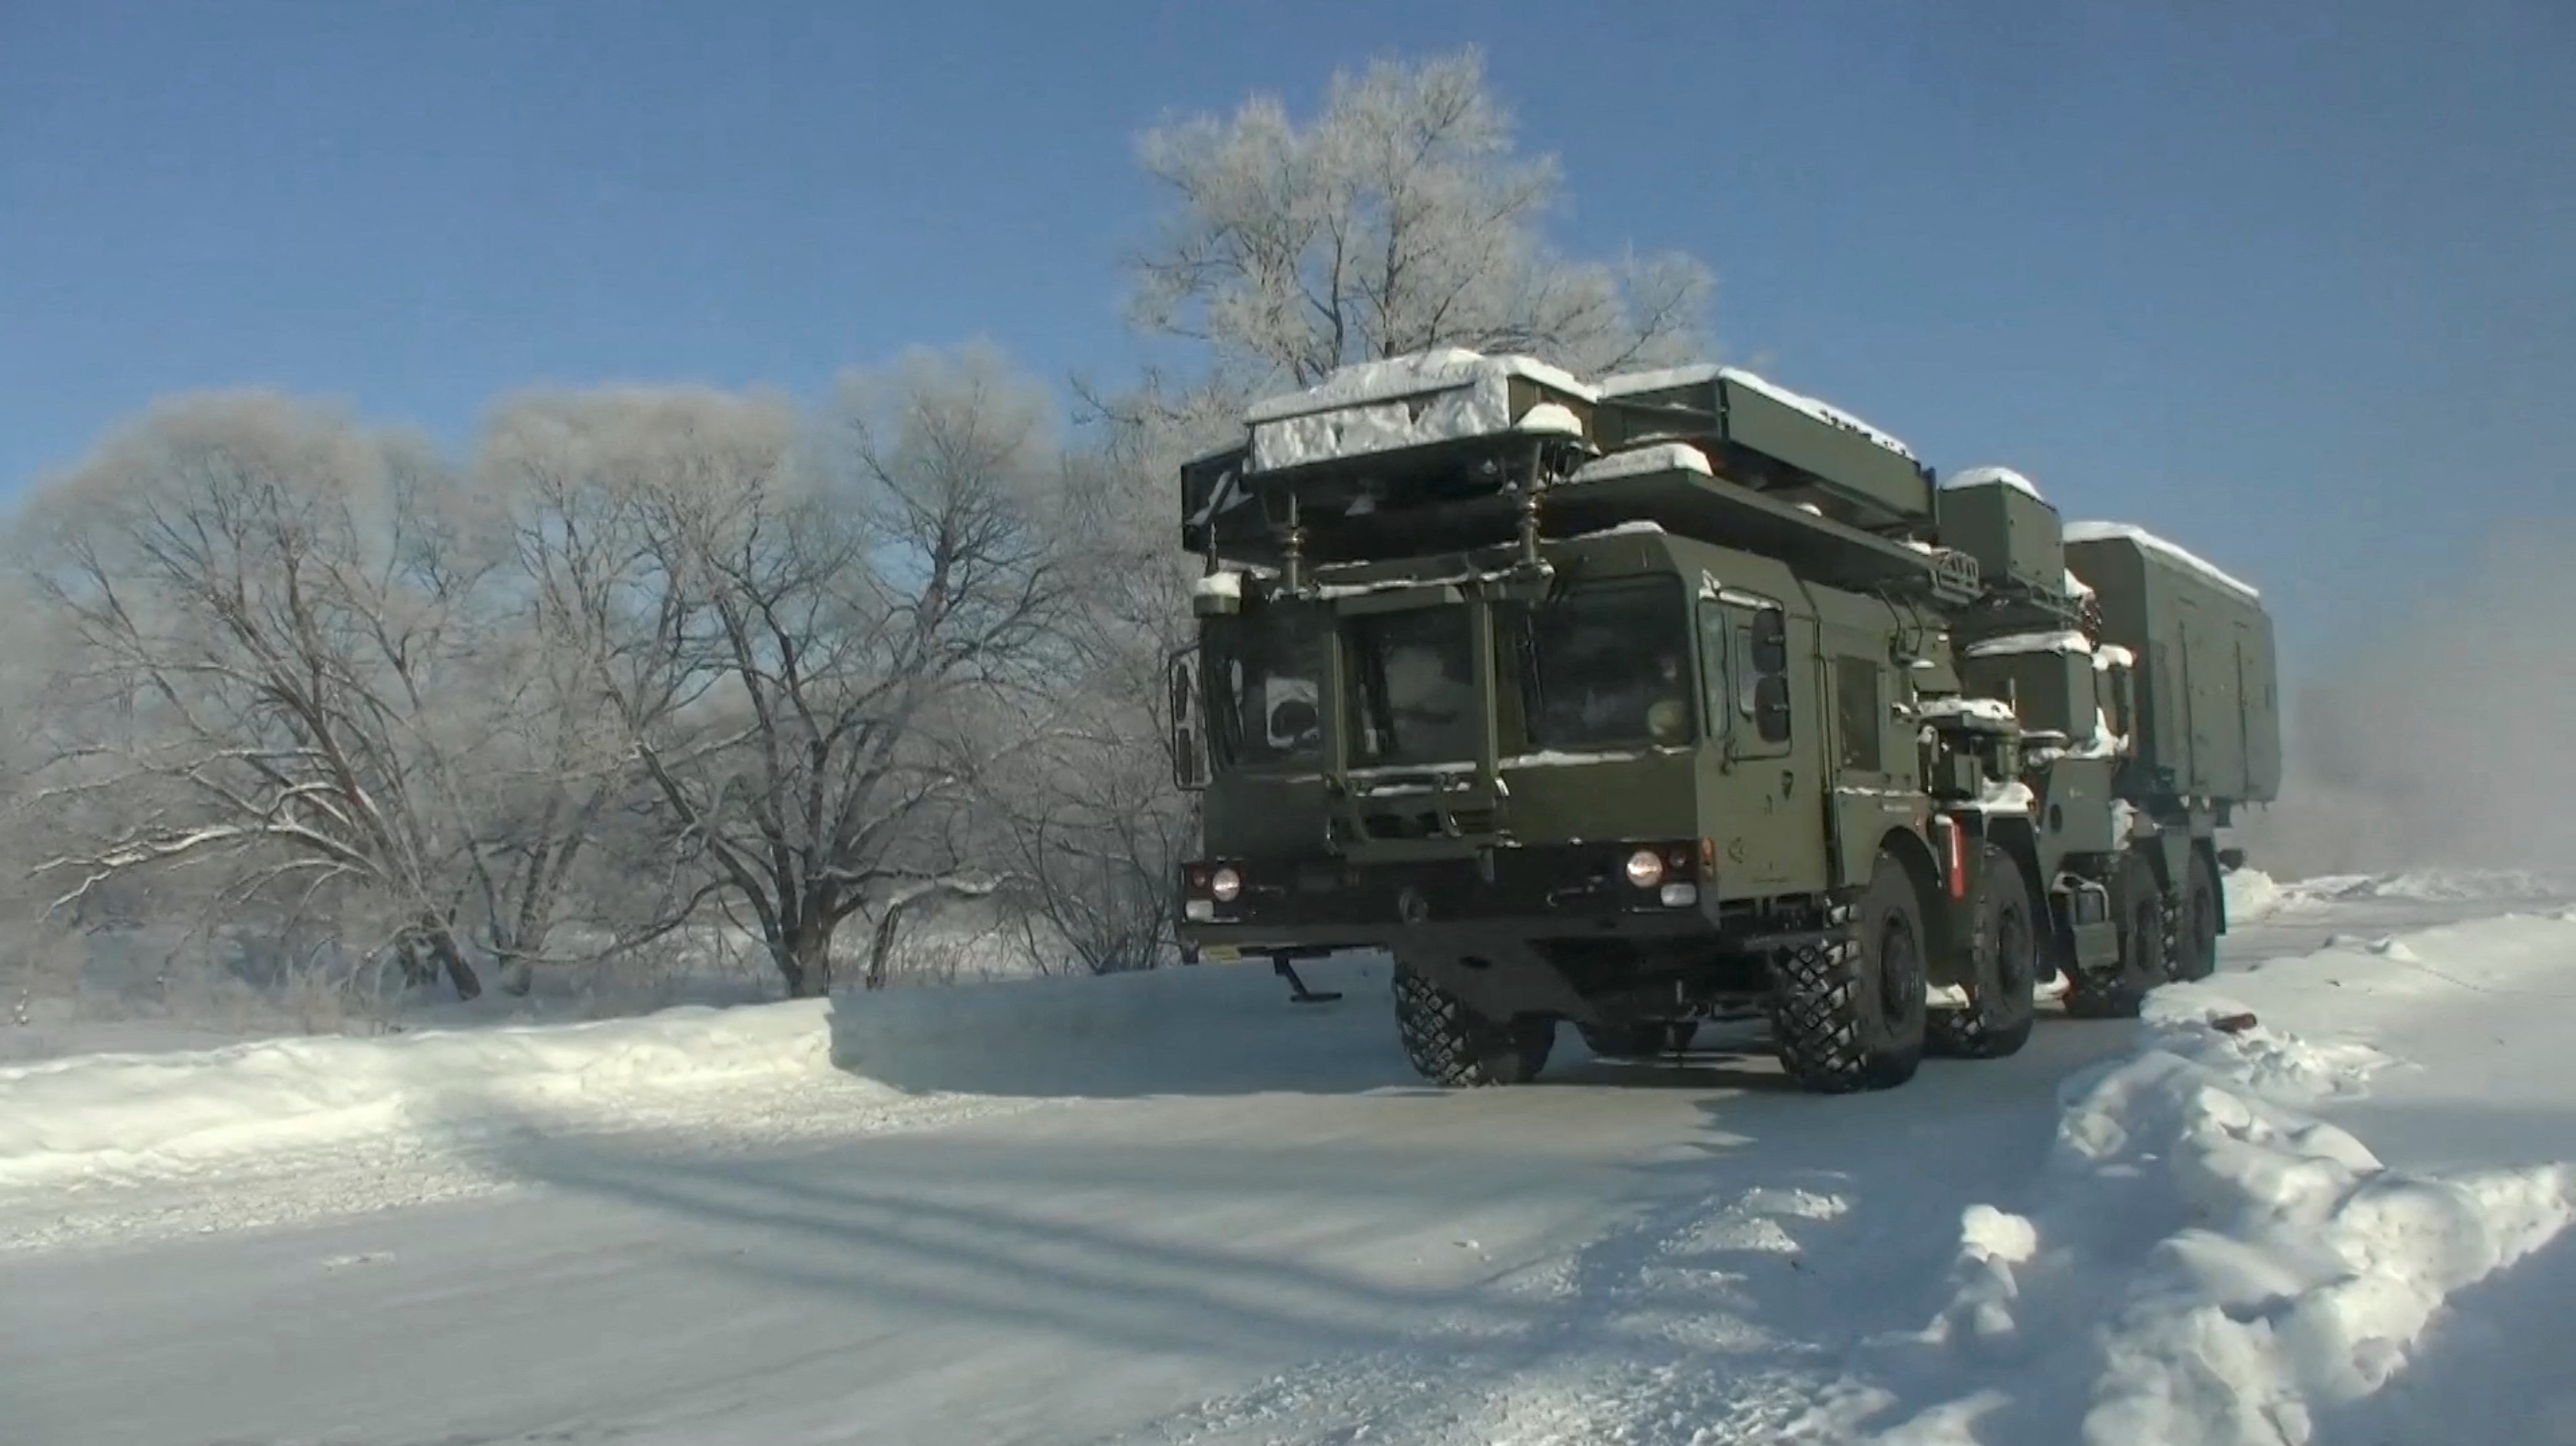 A radar vehicle of the S-400 Triumph surface-to-air missile system drives along a road on the way to Belarus to join military drills, in Khabarovsk region, Russia, in this still image taken from video released January 21, 2022. Russian Defence Ministry/Handout via REUTERS